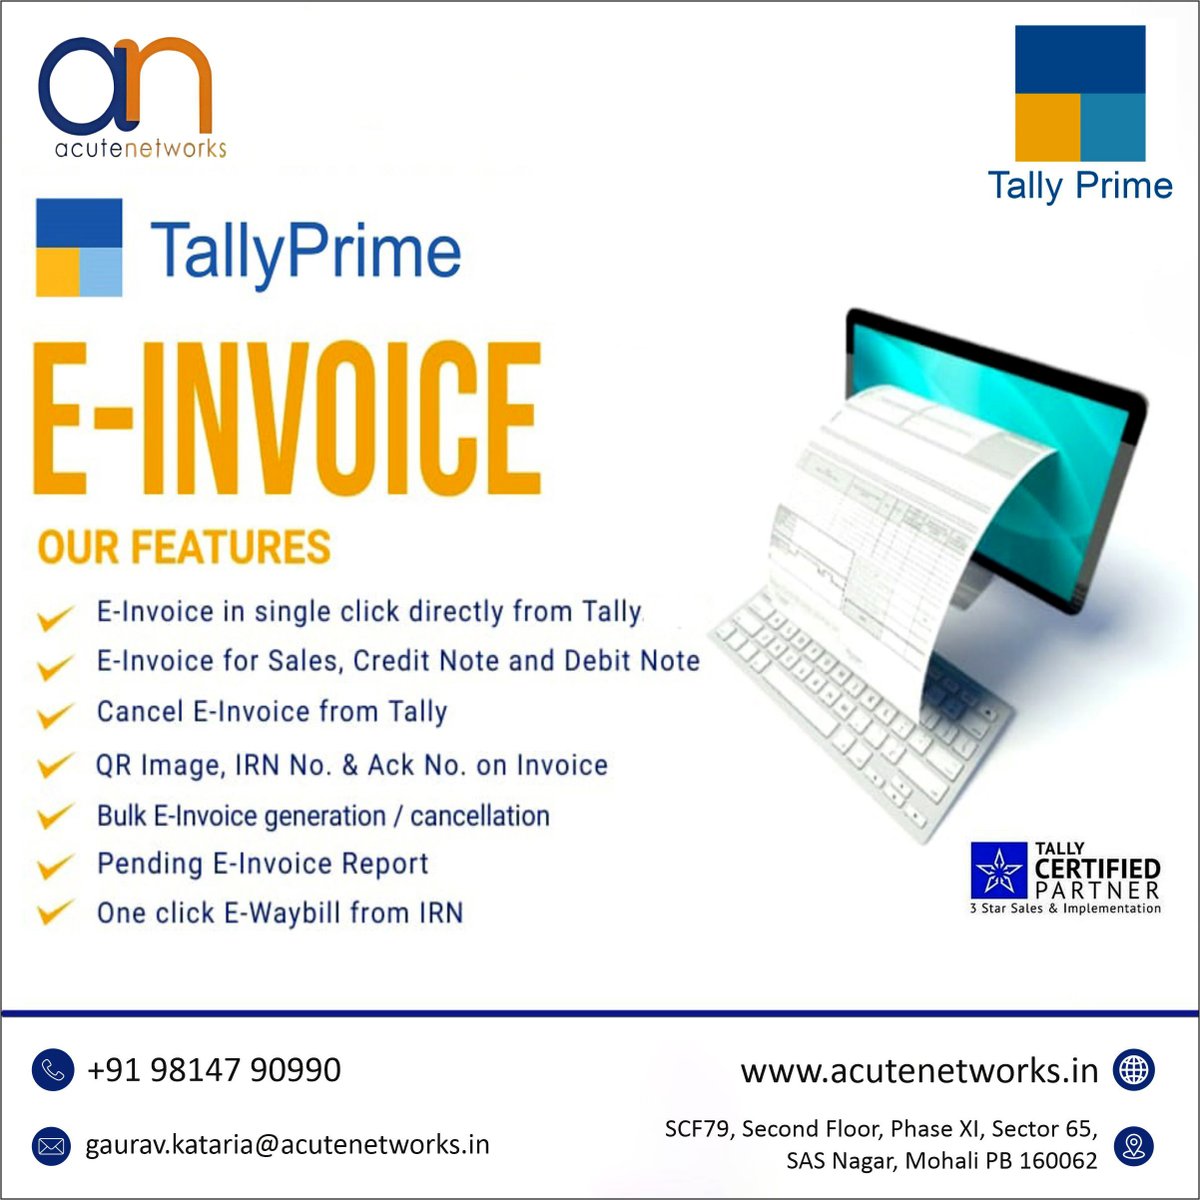 Invoicing on your mind? Tally E-Innovice has you covered! Stay GST compliant, reduce errors, and streamline your financials
'Acute Professional Networks LLP
website: acutenetworks.in
#EInvoice #ElectronicInvoicing #DigitalInvoices  #EInvoicing #PaperlessBilling